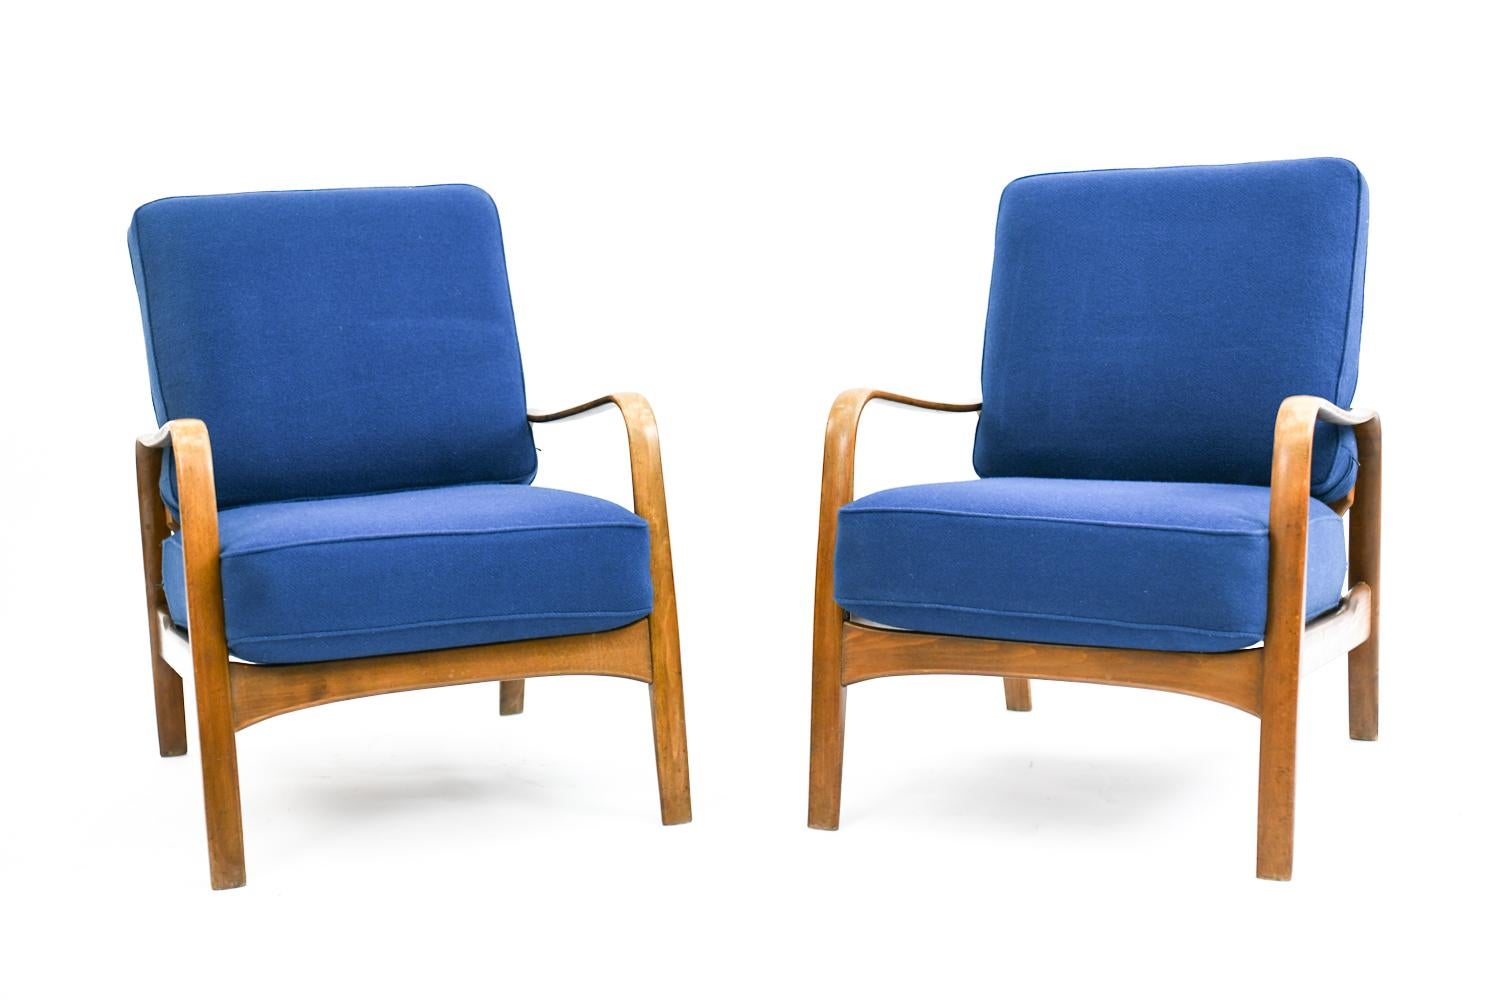 This sofa suite was designed by Magnus Stephensen for Fritz Hansen as an early example of Danish Mid-Century Modern style, circa 1930s-1940s. The suite includes loveseat and a pair of lounge chairs with rounded arms and blue upholstery.